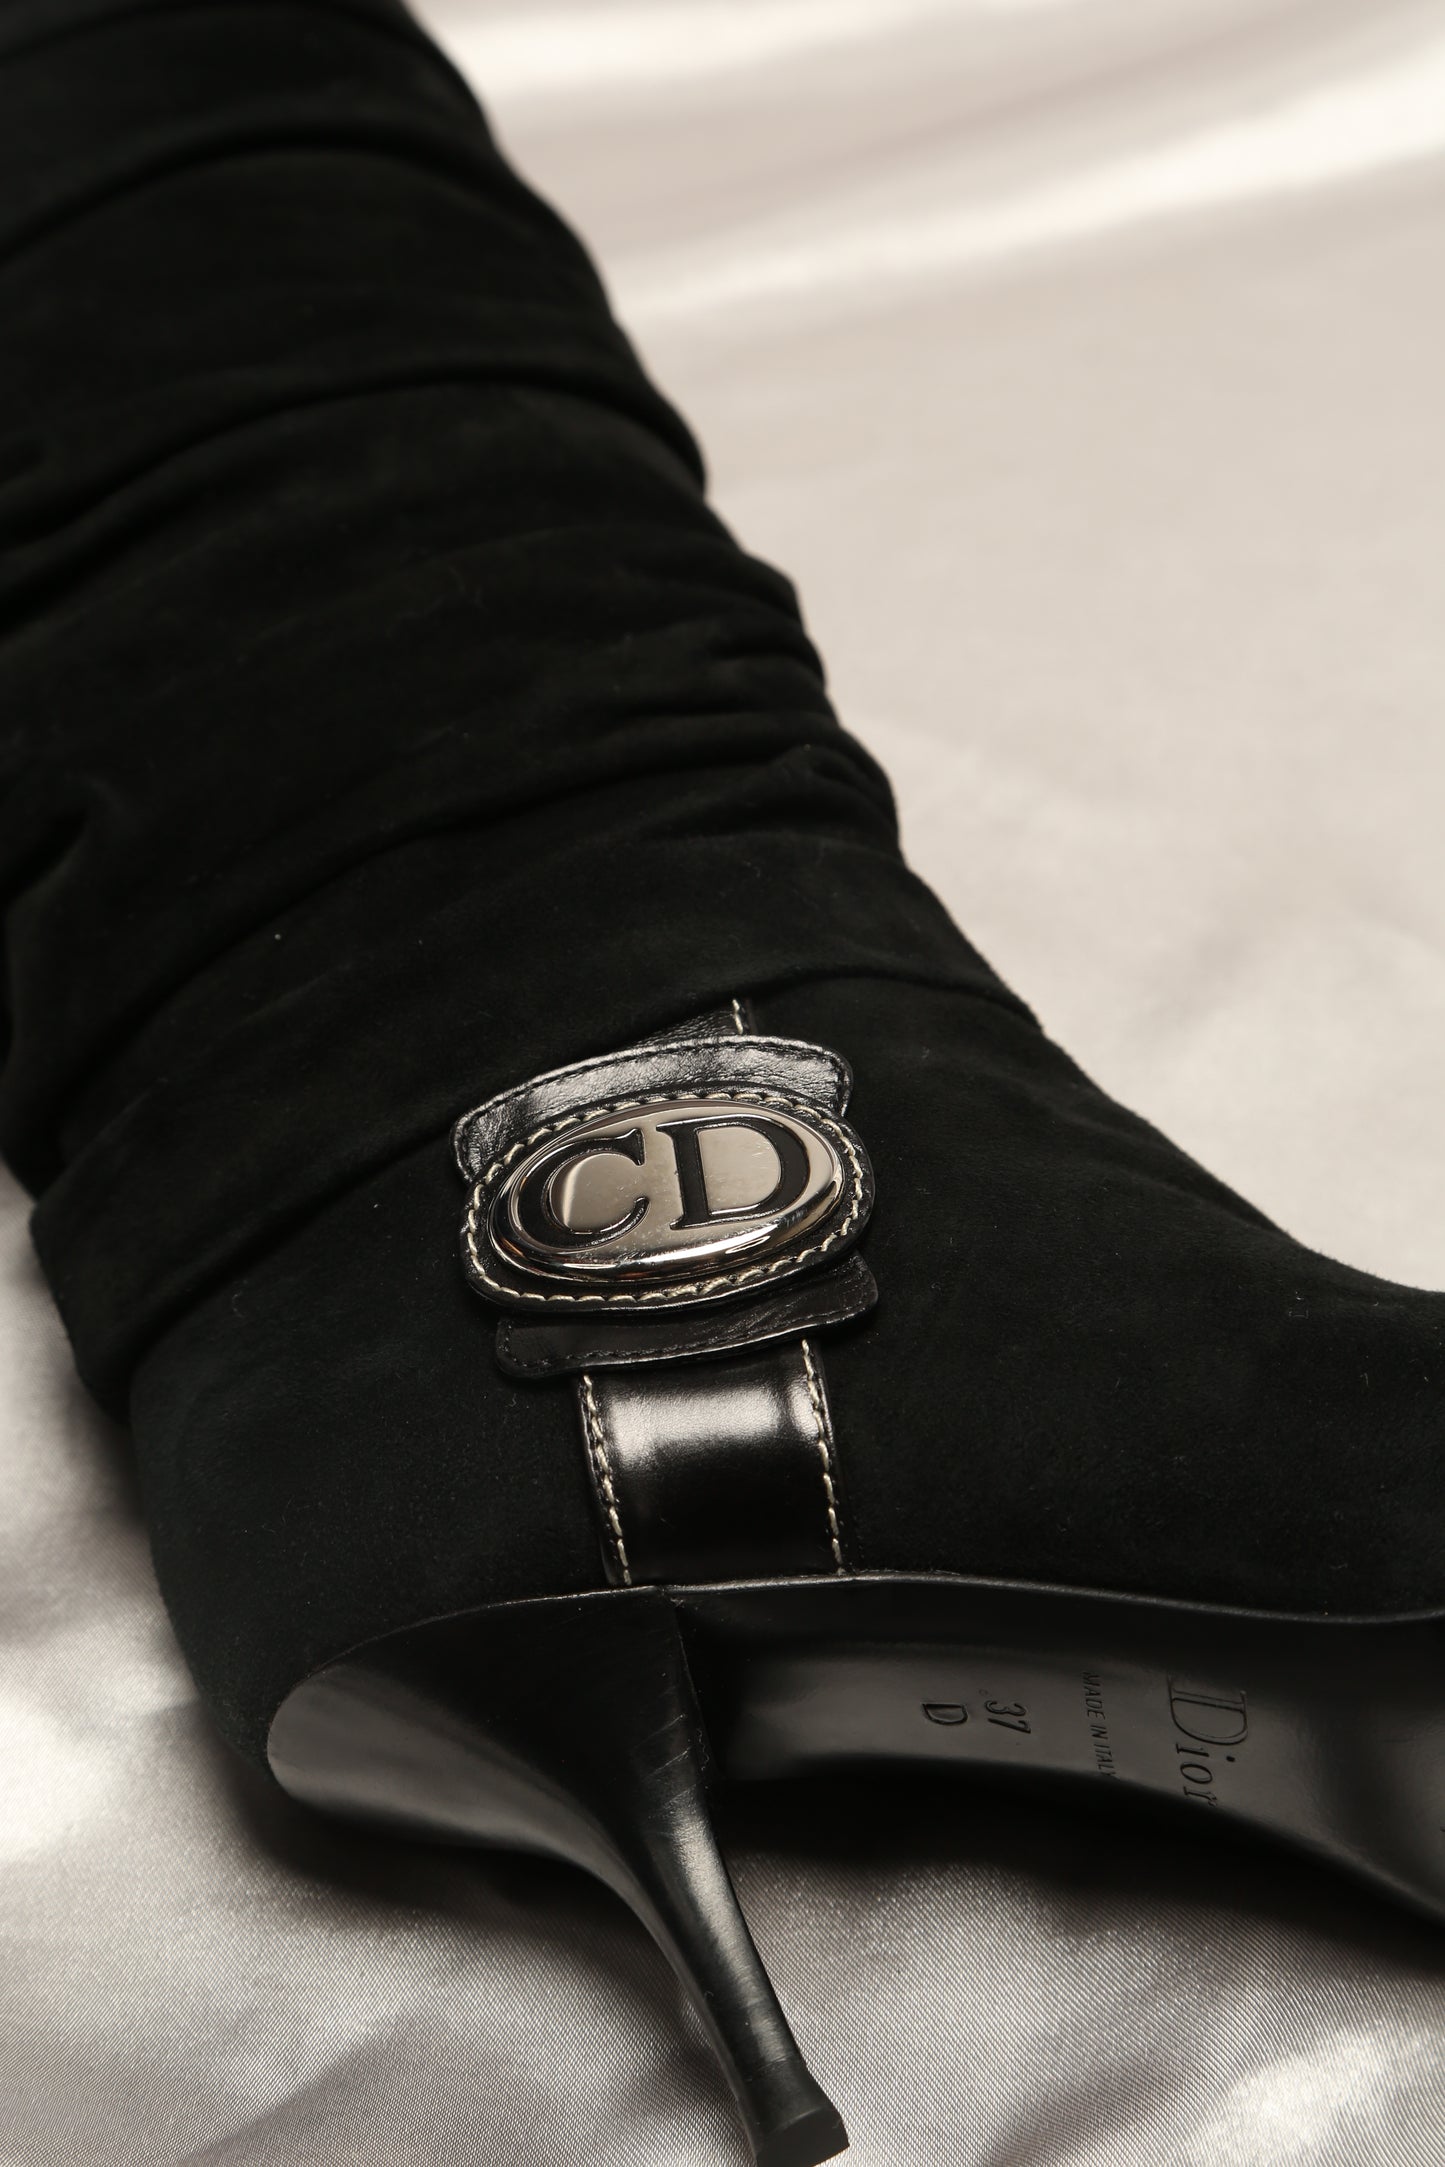 Extremely Rare Vintage DIOR Boots